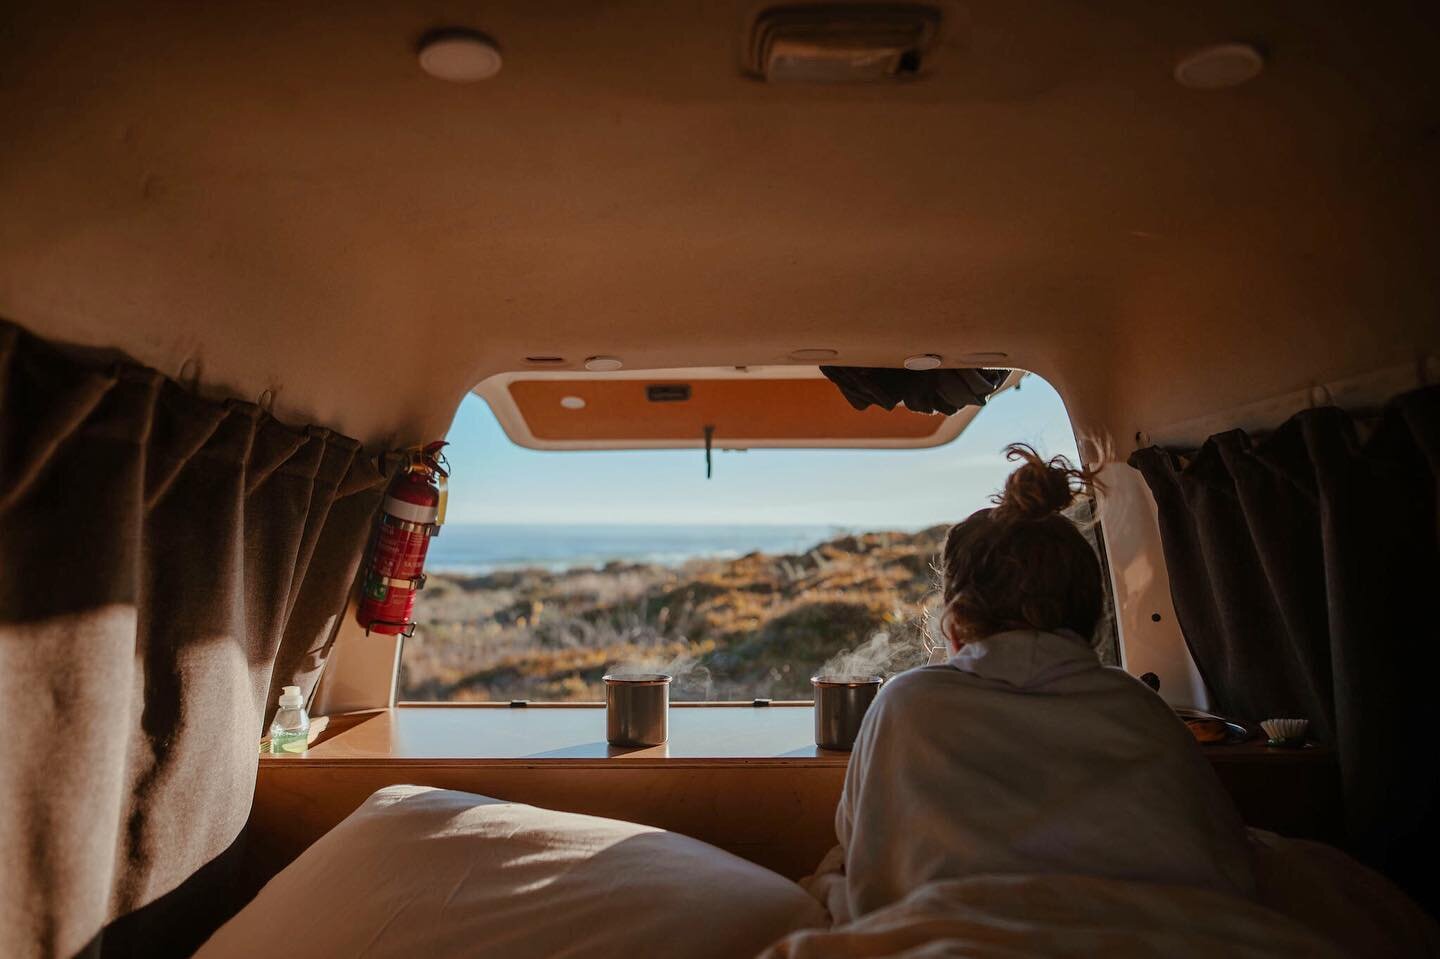 Happy Easter Weekend Friends 🐣 we&rsquo;re all booked out, sun is shining and good vibes all round ✌🏼 Hope the Easter bunny comes .
.
.📷 @amysmagiclife 
.
.

#travelphotography #vanbuild #vwcamper #vanlifeideas #photography #camperlifestyle #motor